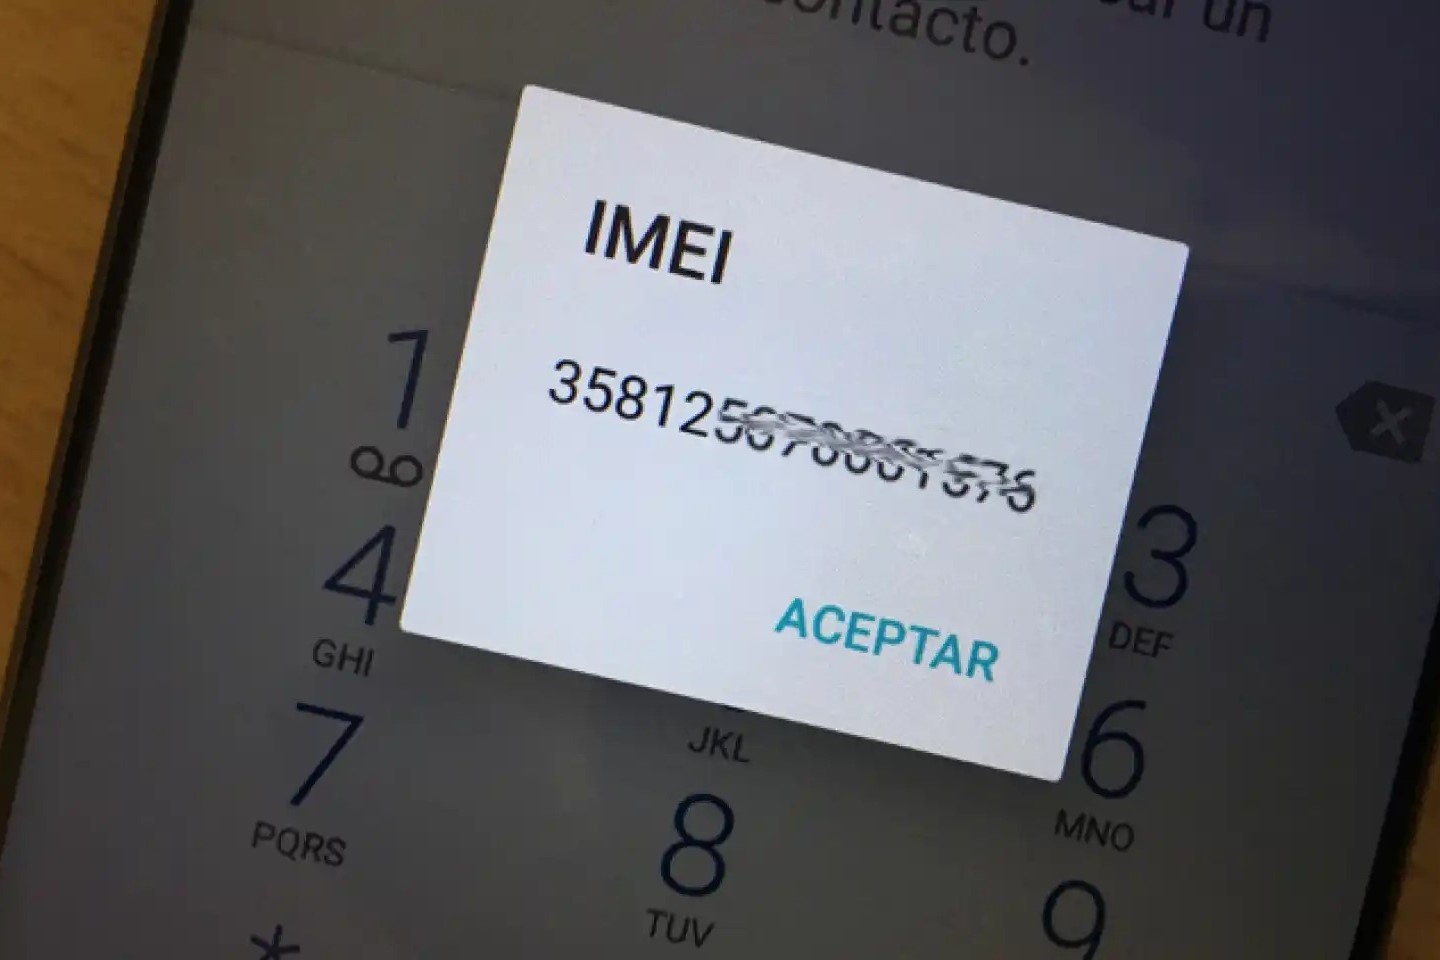 identifying-activated-sim-card-via-imei-number-a-comprehensive-guide